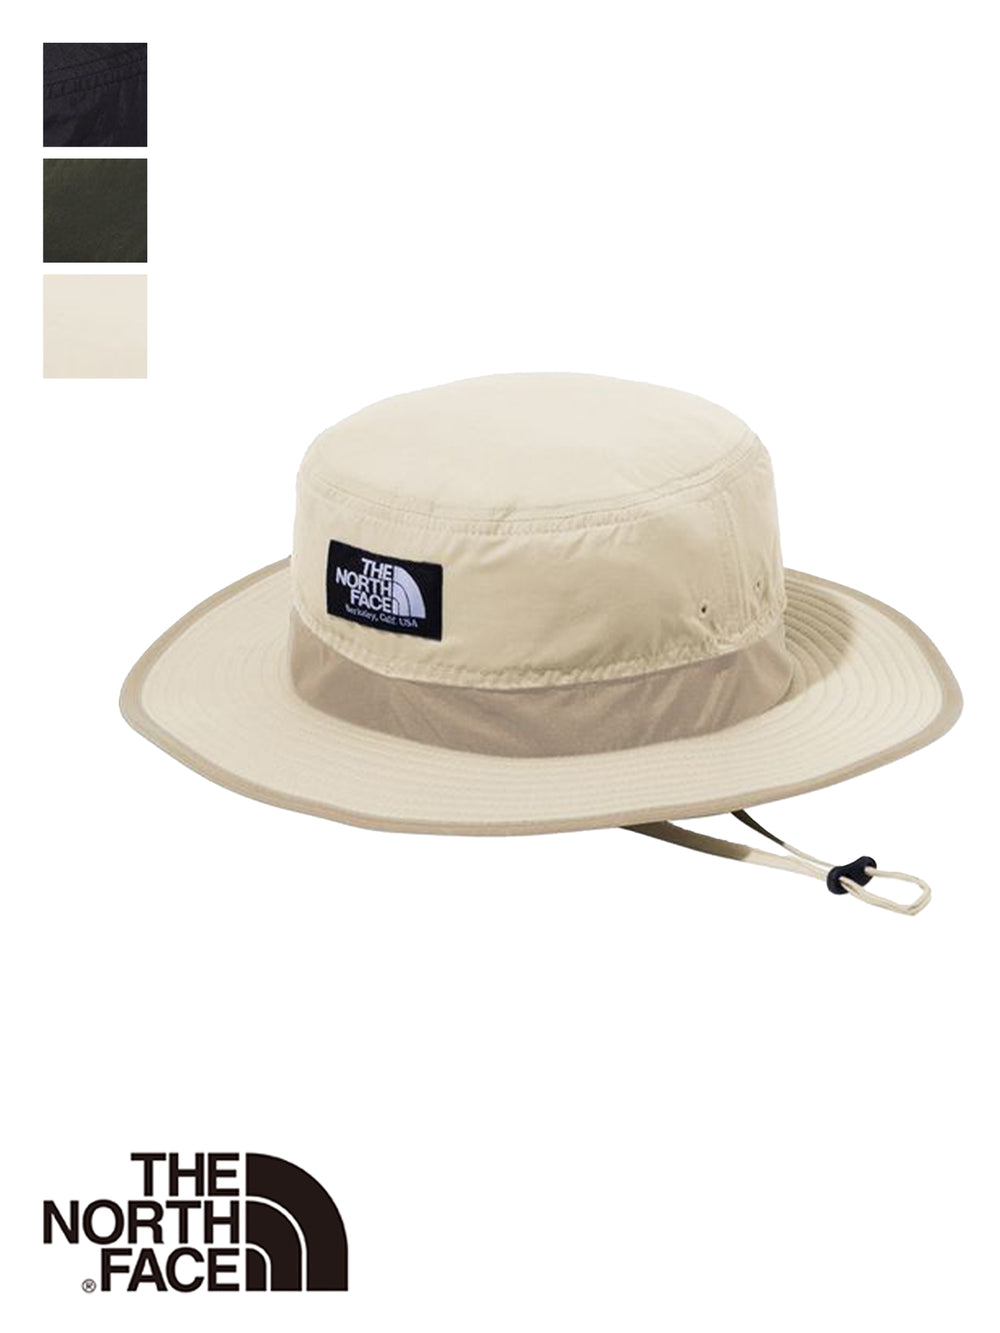 [THE NORTH FACE] Horizon Hat / The North Face Unisex Outdoor UV Protection UV Protection Sunburn NN02103 23SS